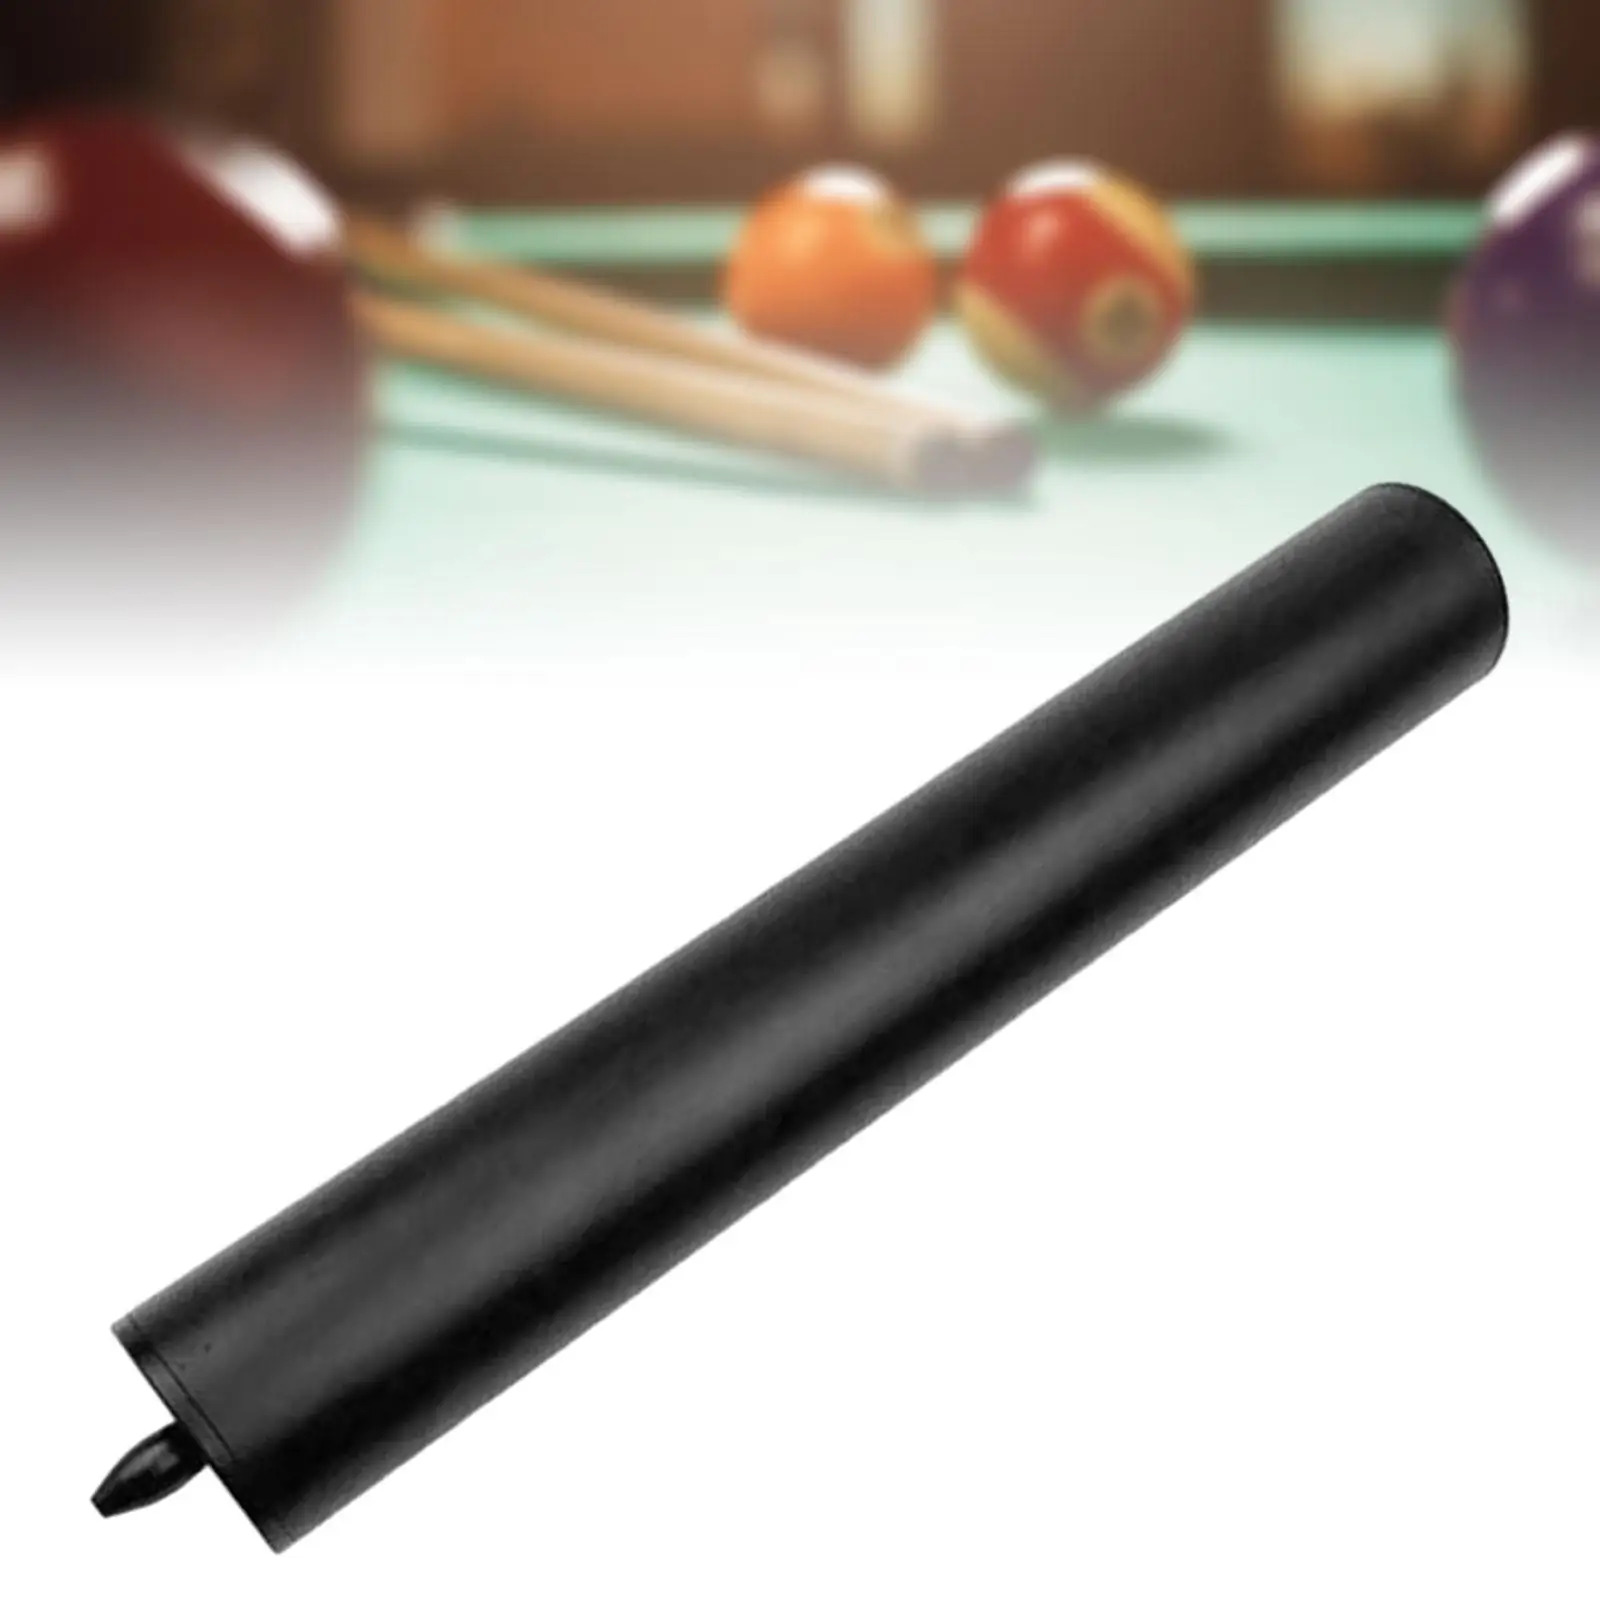 Pool Cue Extender, Snooker Cue Extension, Cue End Lengthener, Billiards Pool Cue Extension for Beginners Enthusiast Accessory